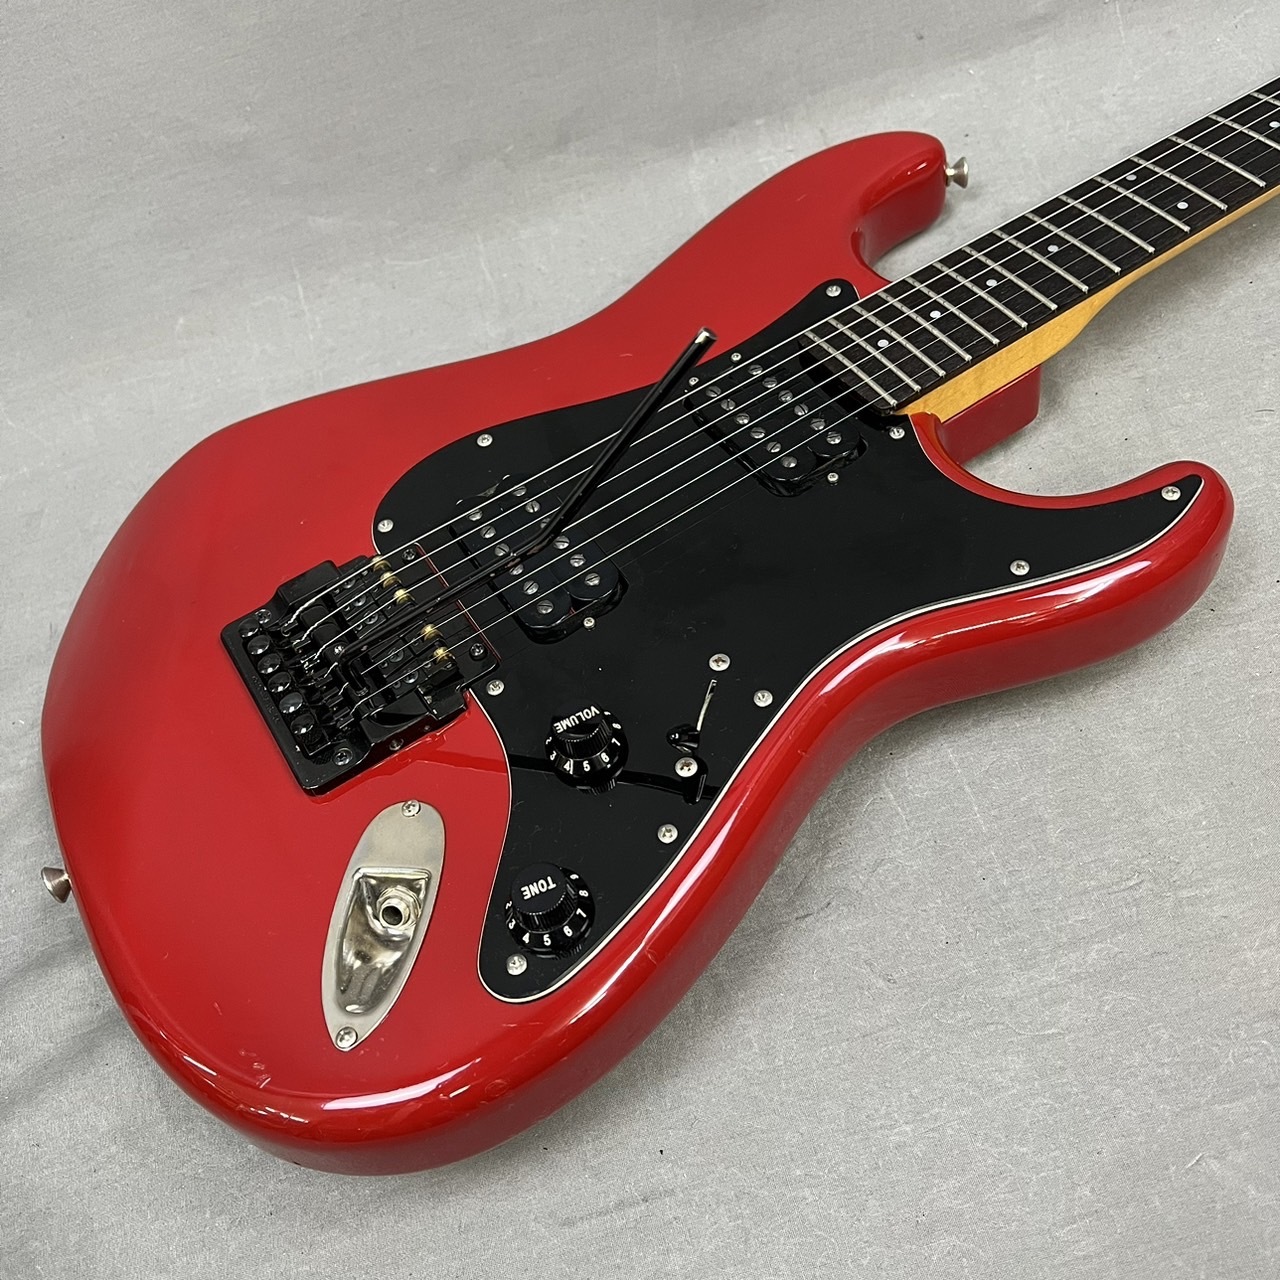 Squier by Fender ST502 contemporary Series JVシリアル MOD 